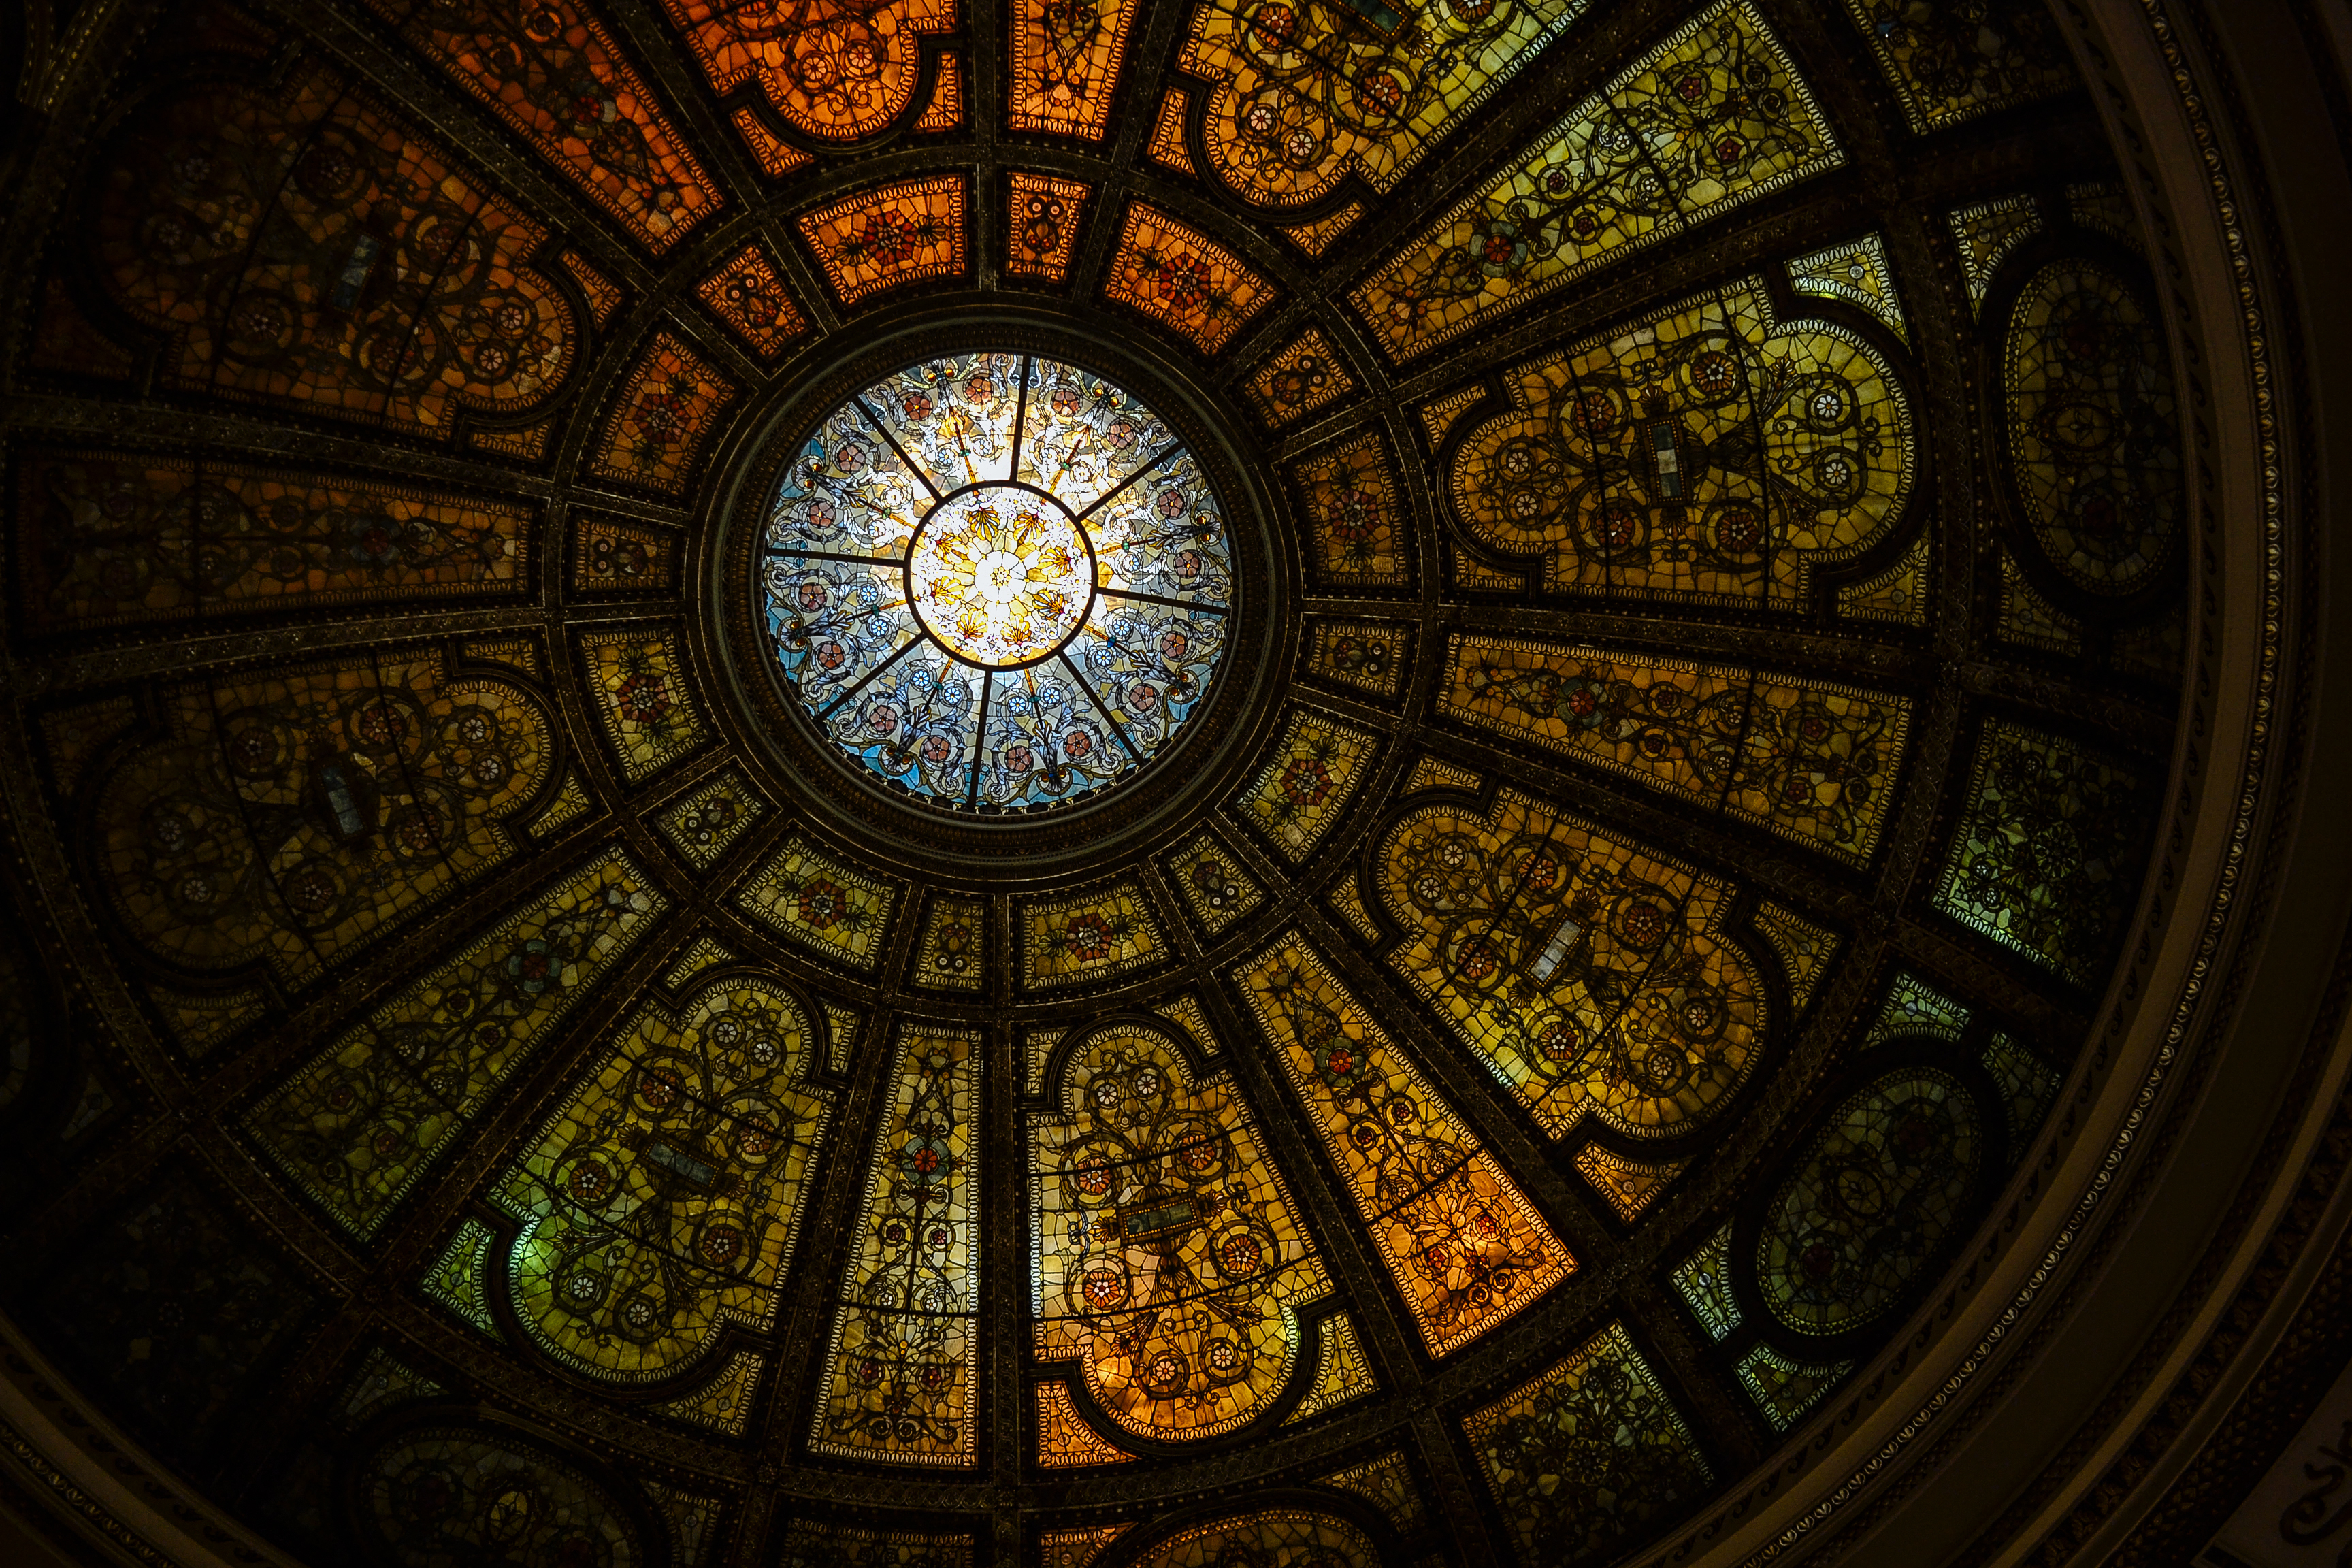 stained glass, photography, architecture, ceiling, colorful, dome